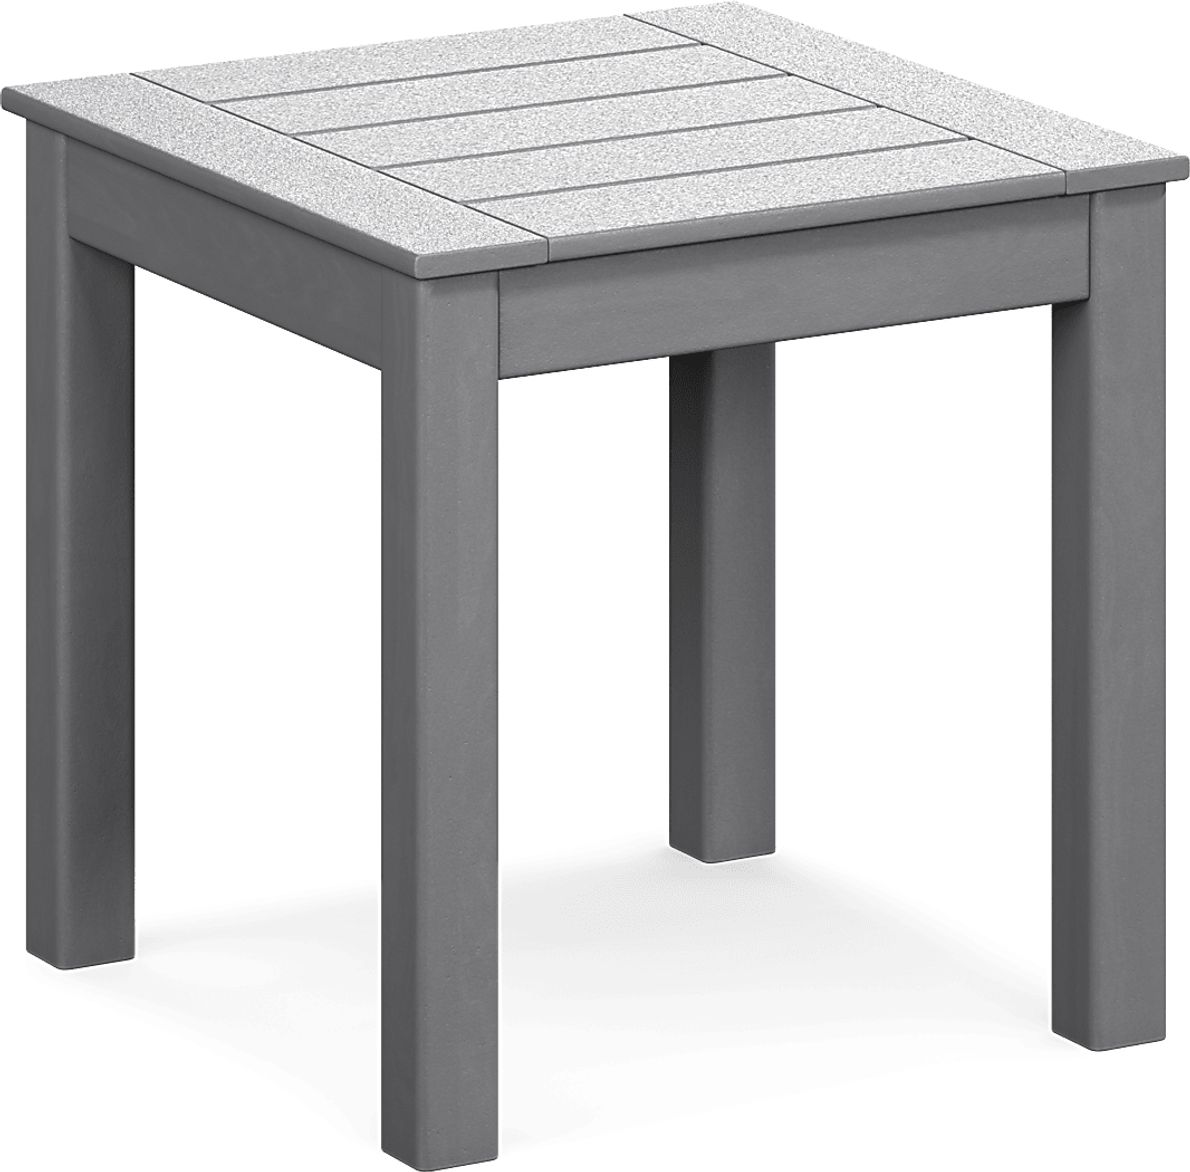 Addy Gray Outdoor End Table